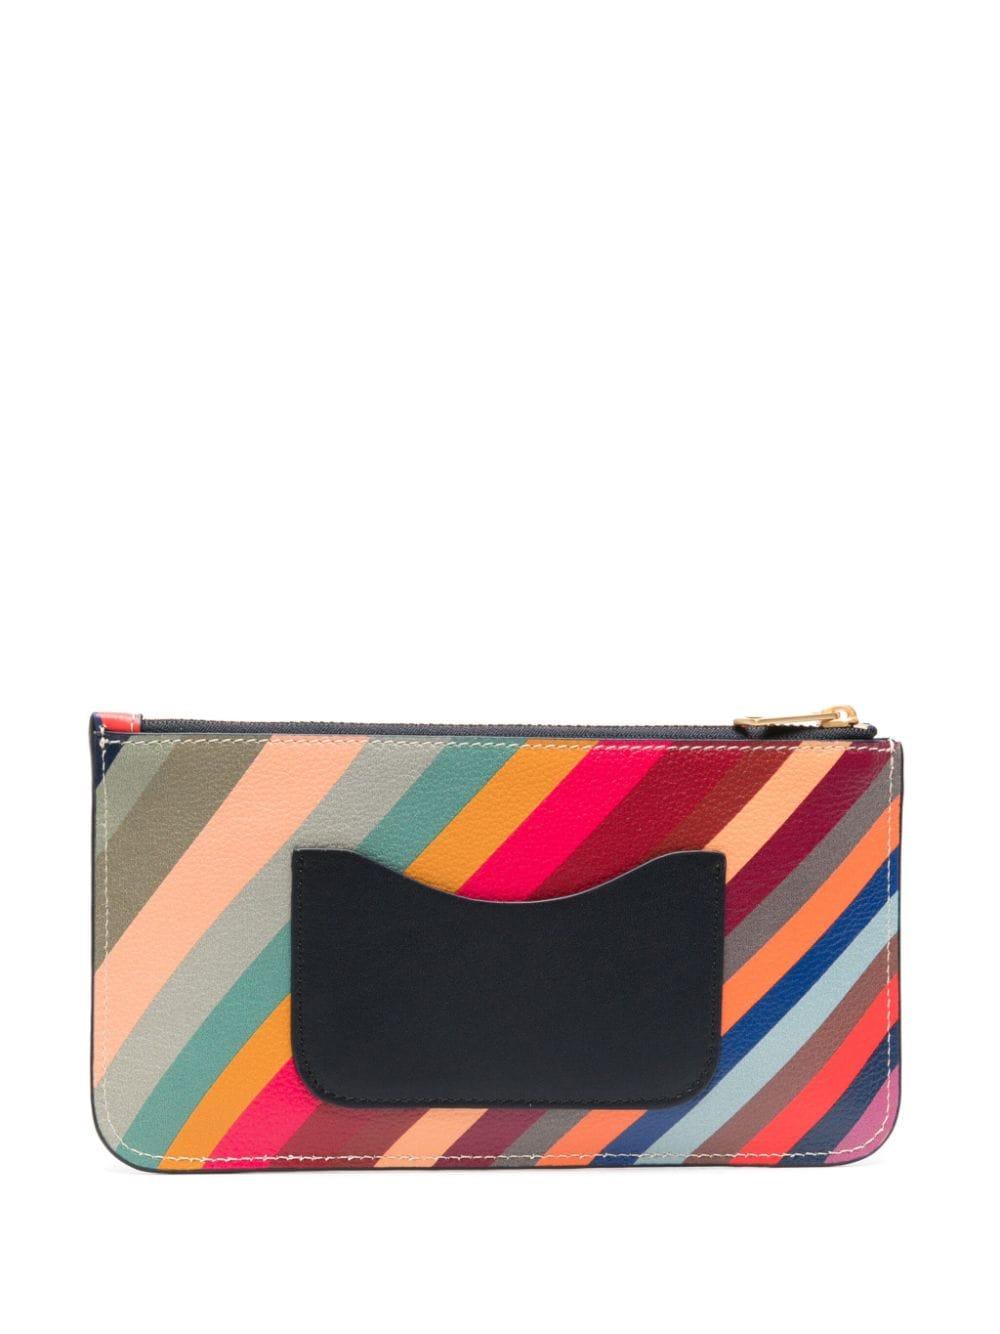 Paul Smith swirl-print leather wallet - Pink